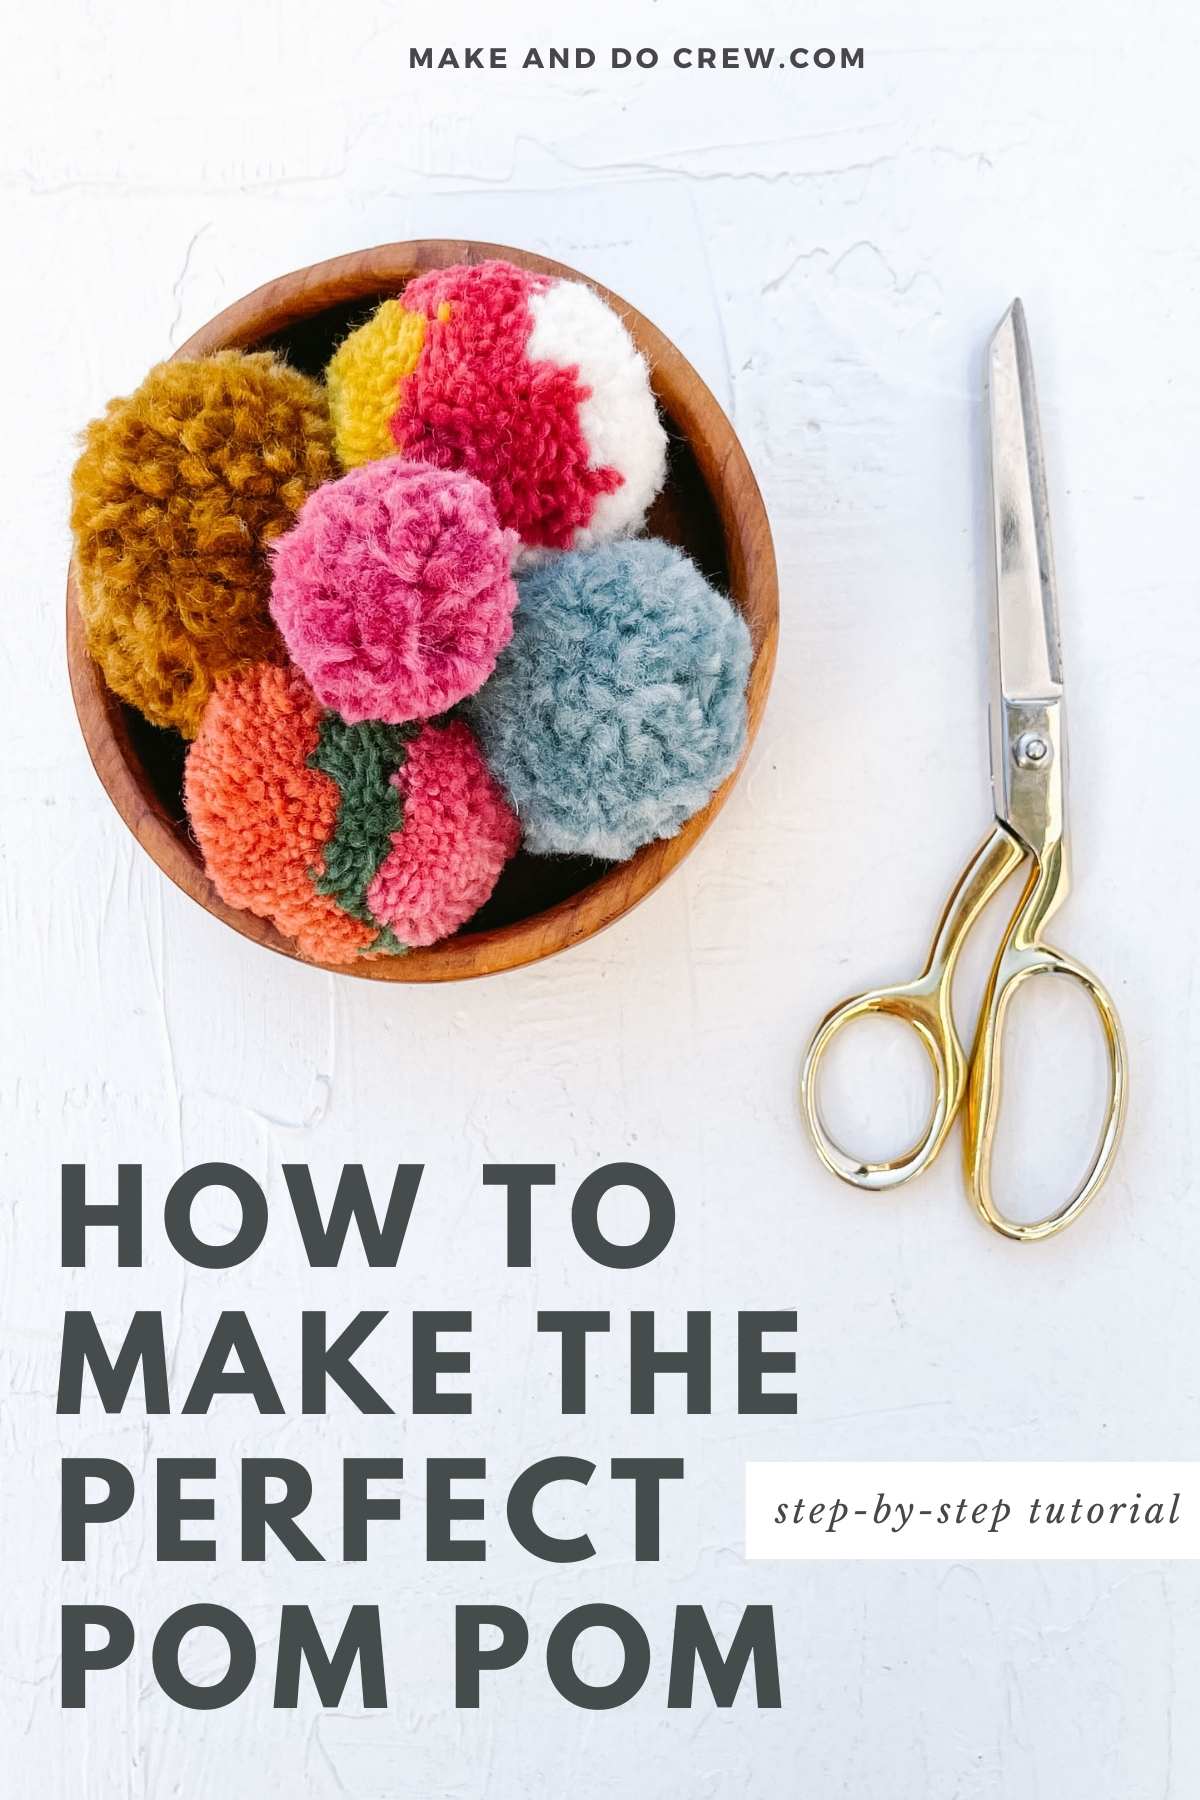 A wooden bowl of perfect pom poms and a scissors.